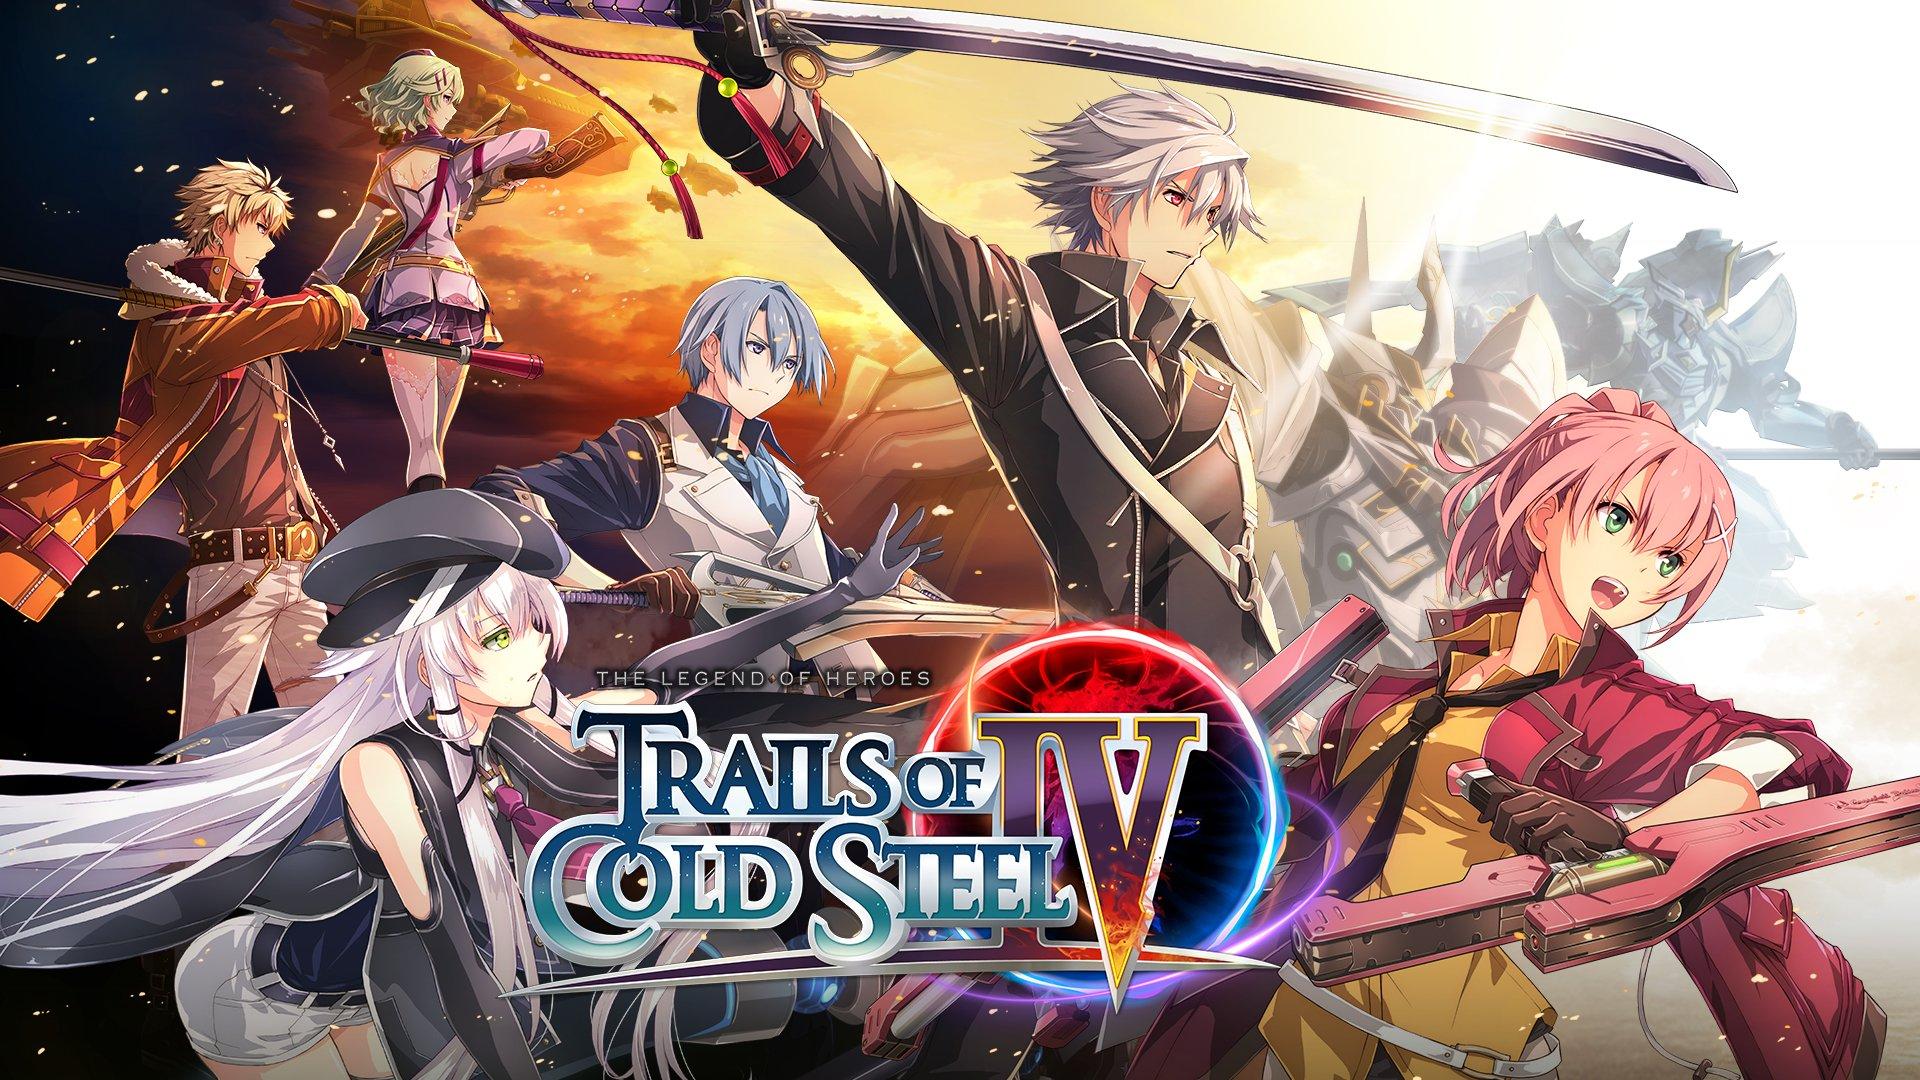 The Legend of Heroes: Trails of Cold Steel IV - Nintendo Switch